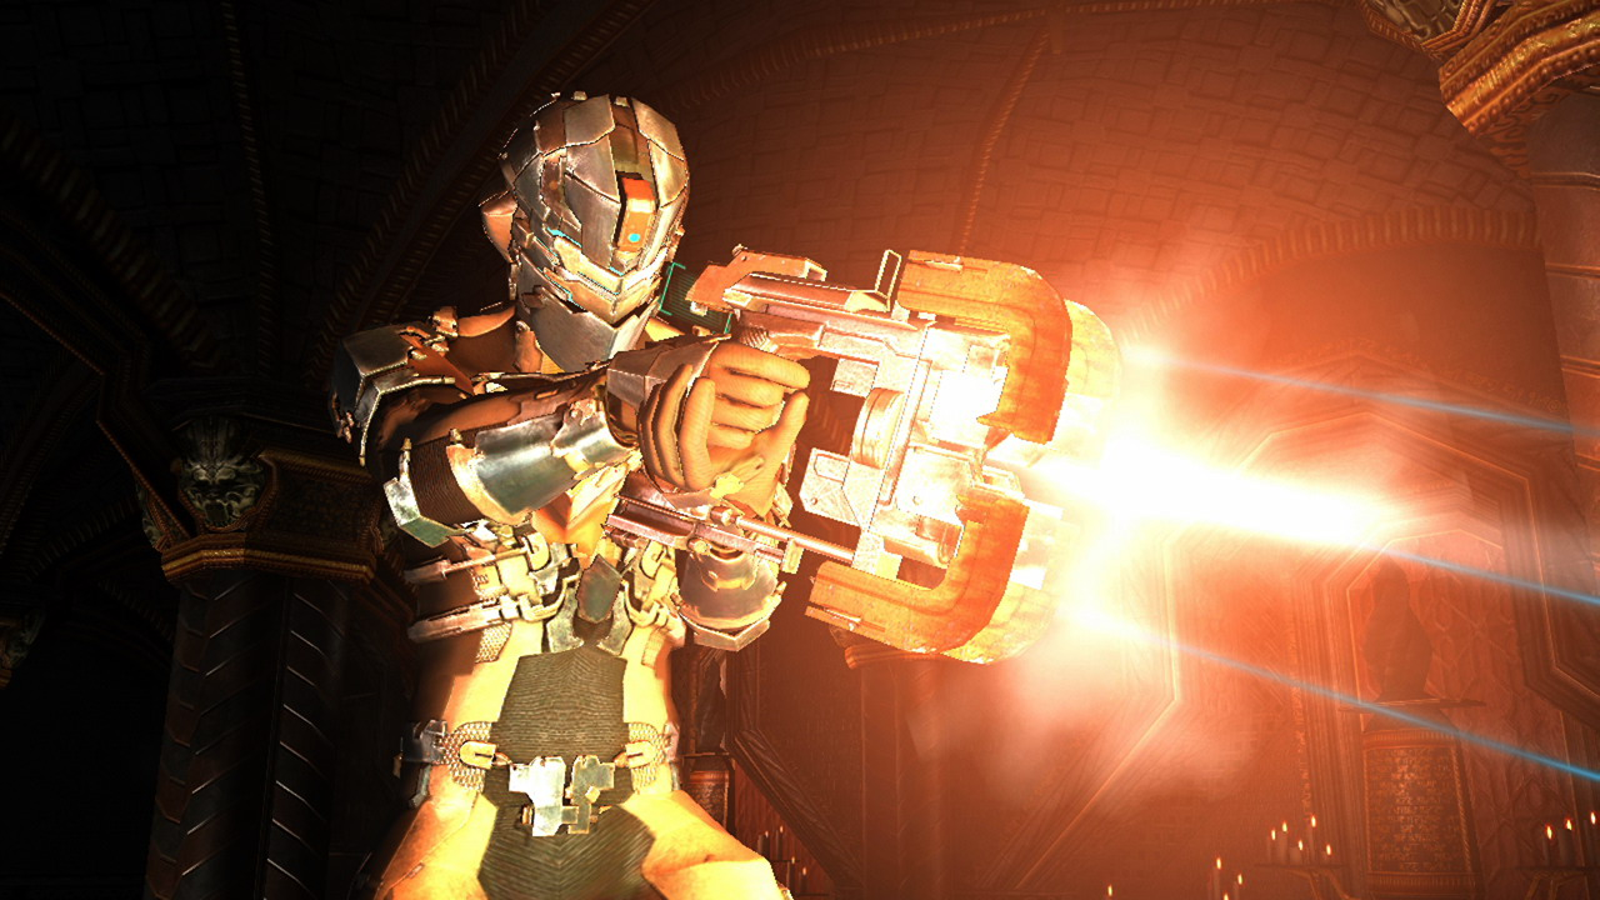 dead space 2 weapons special upgrade